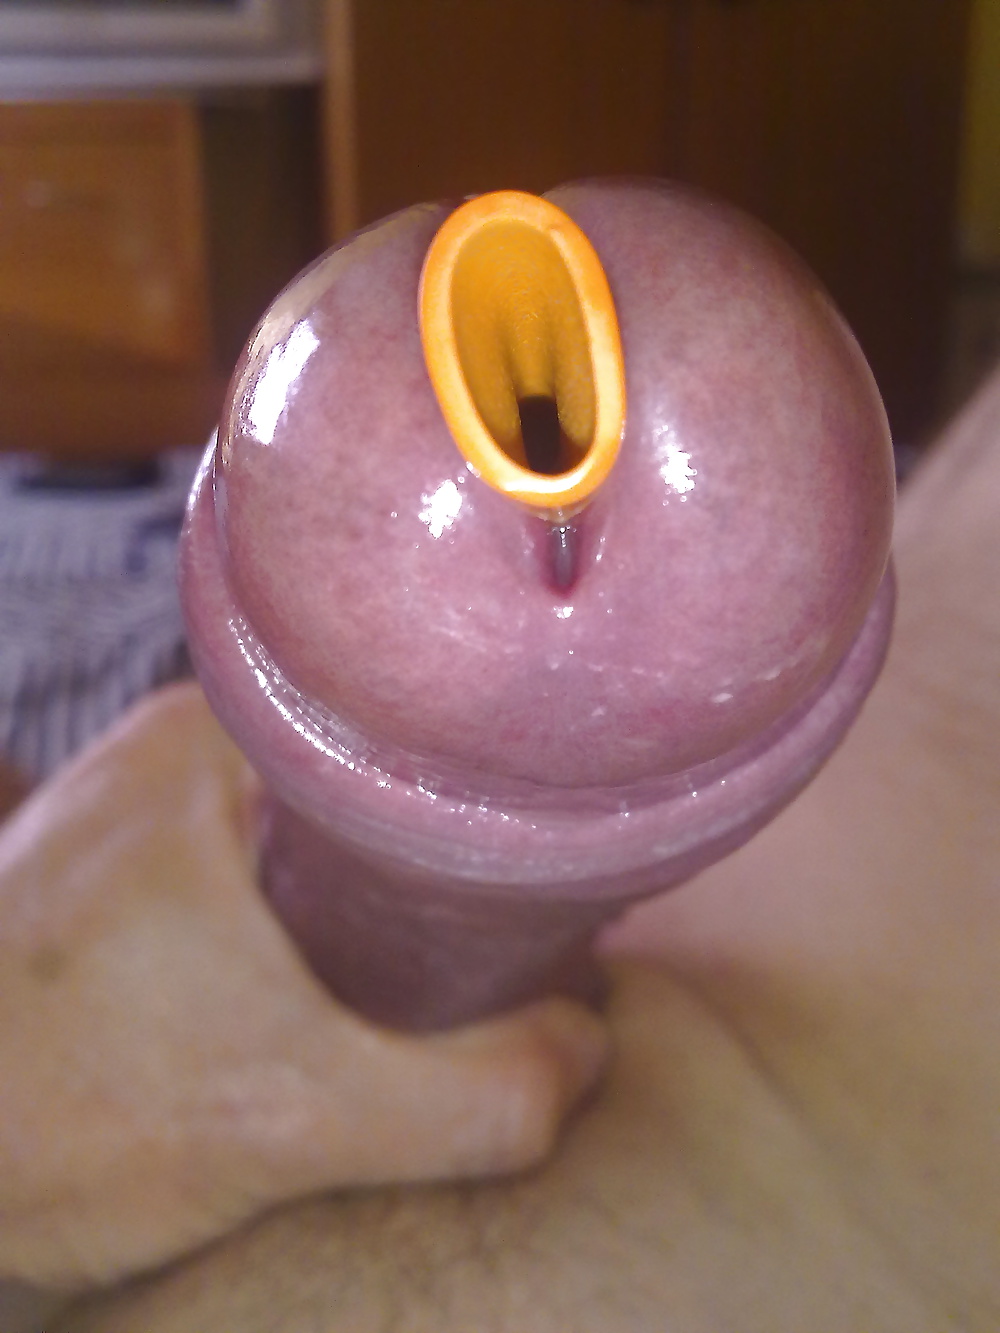 CloseUps of My Stretched-Open Cock Slit: Down The Glans #40735424